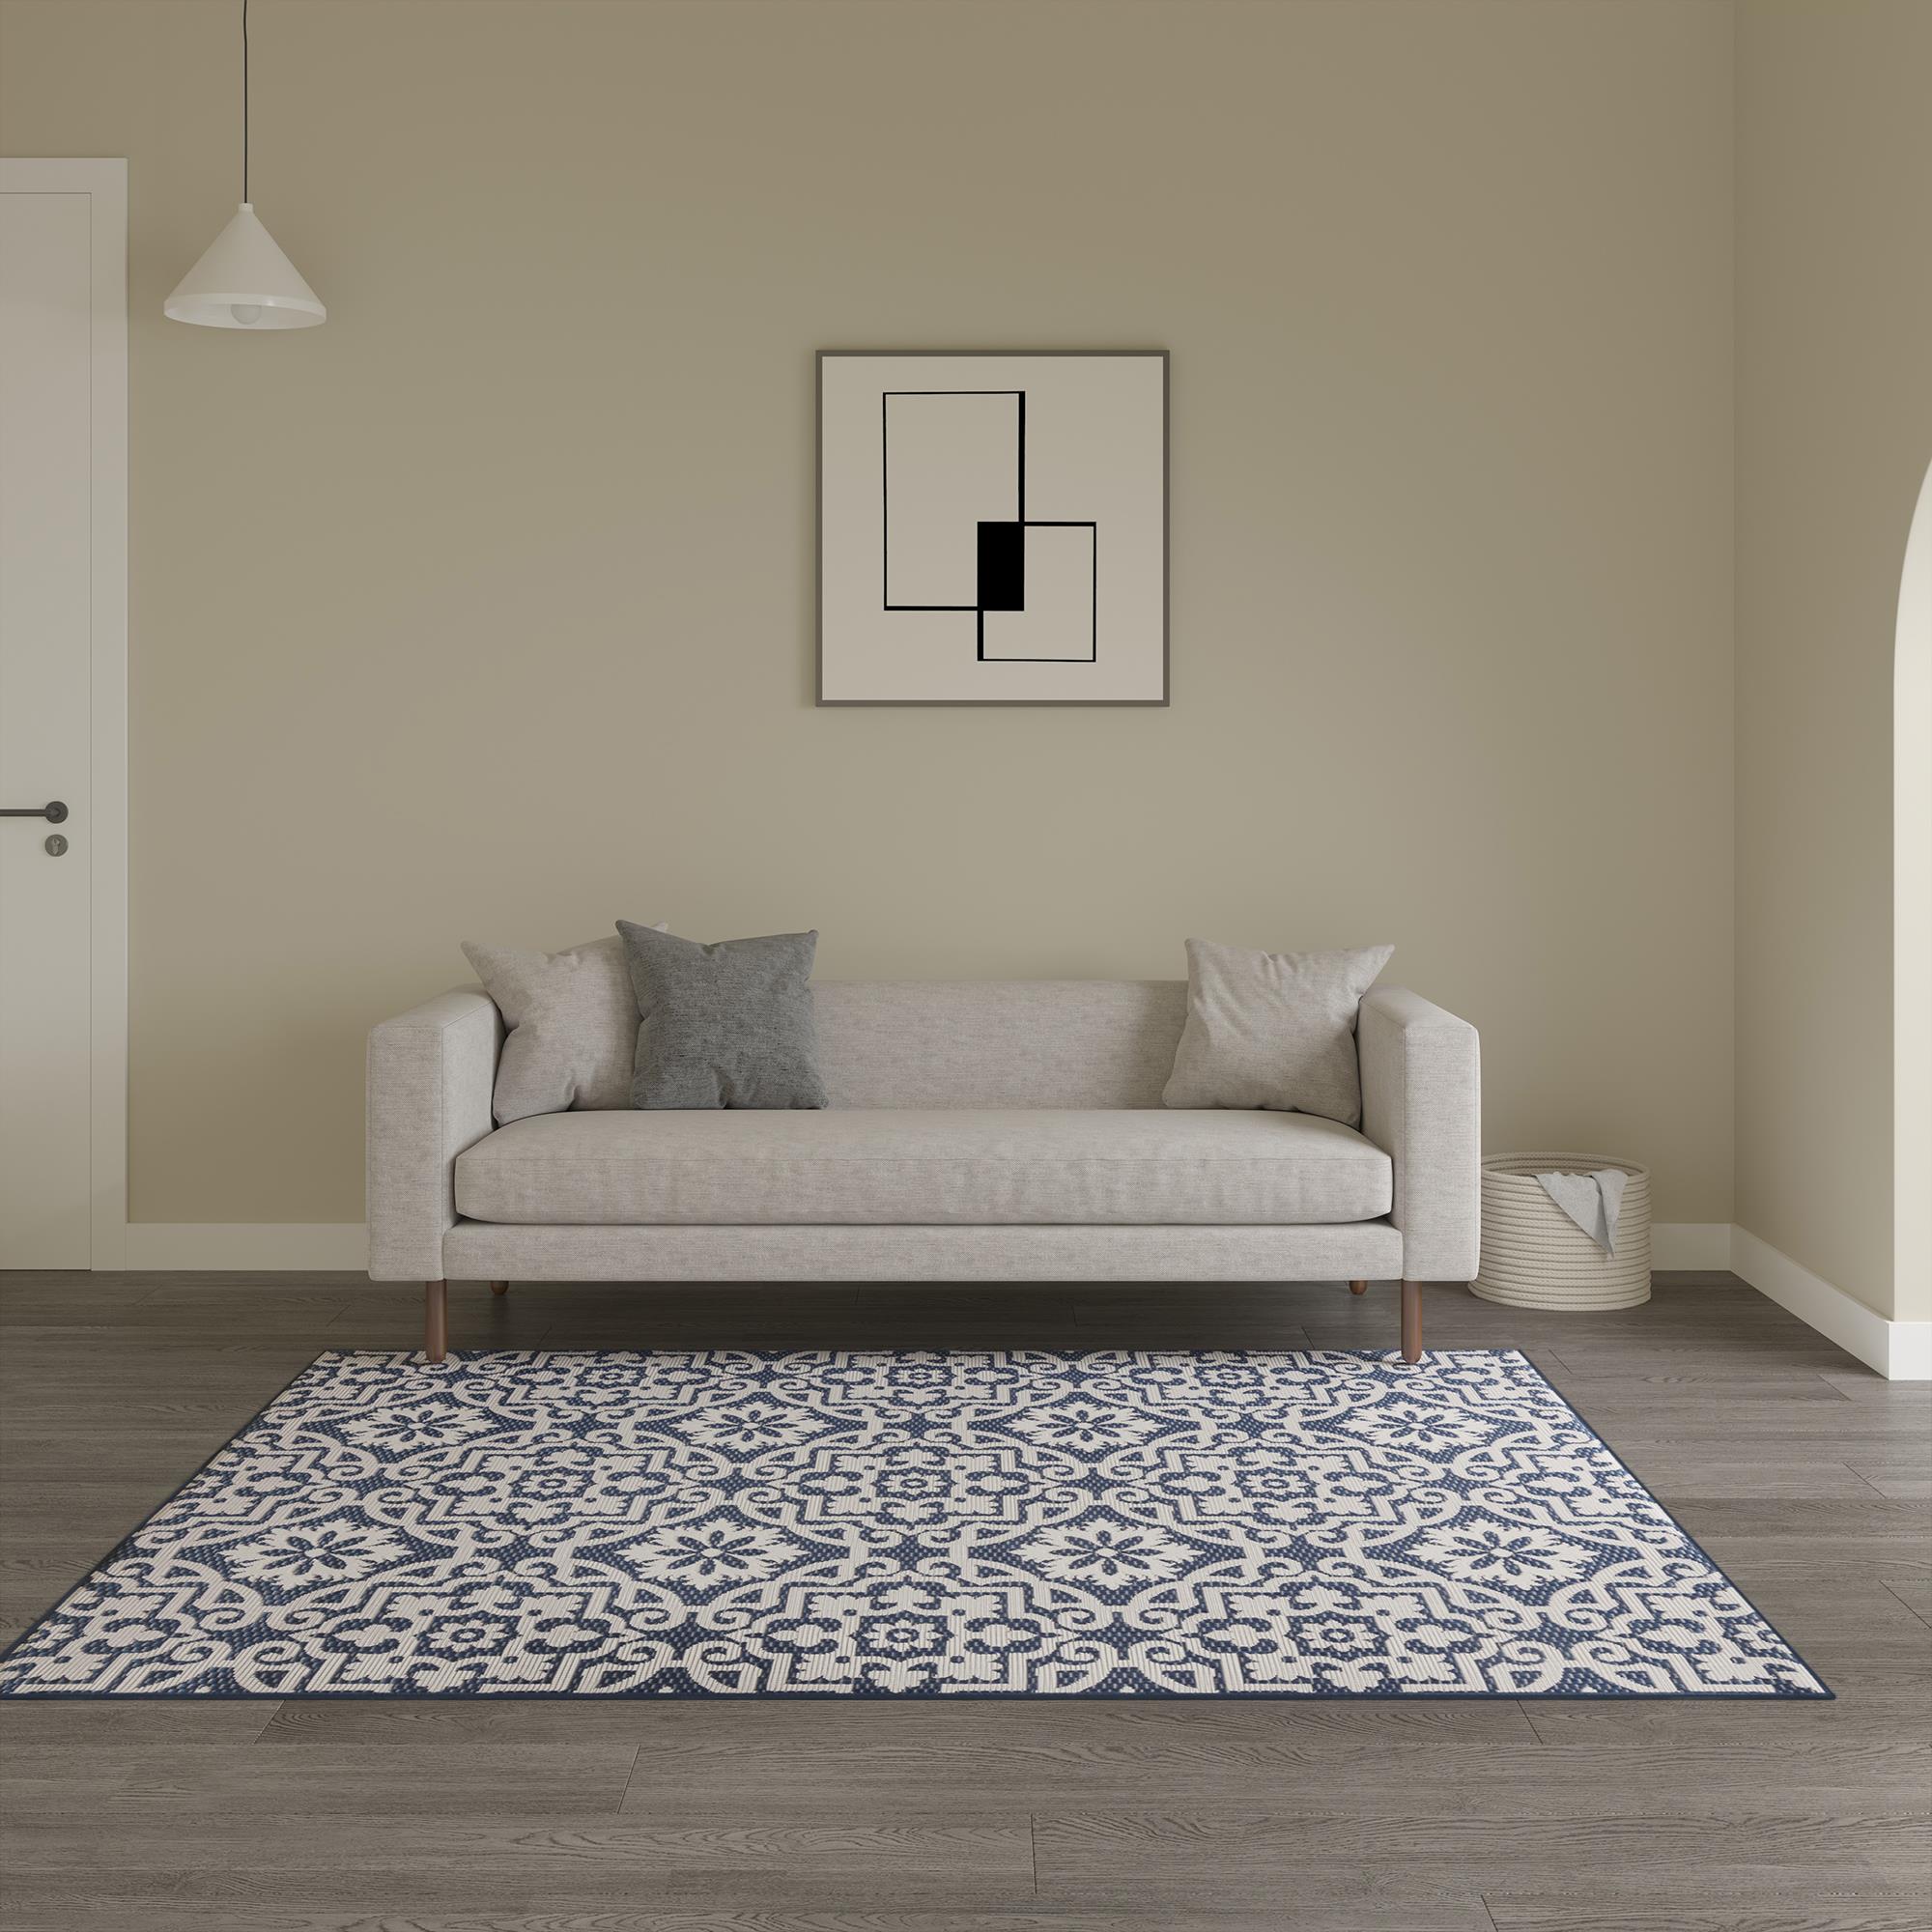 MH LONDON 5 x 8 Blue Indoor/Outdoor Geometric Area Rug in the Rugs ...